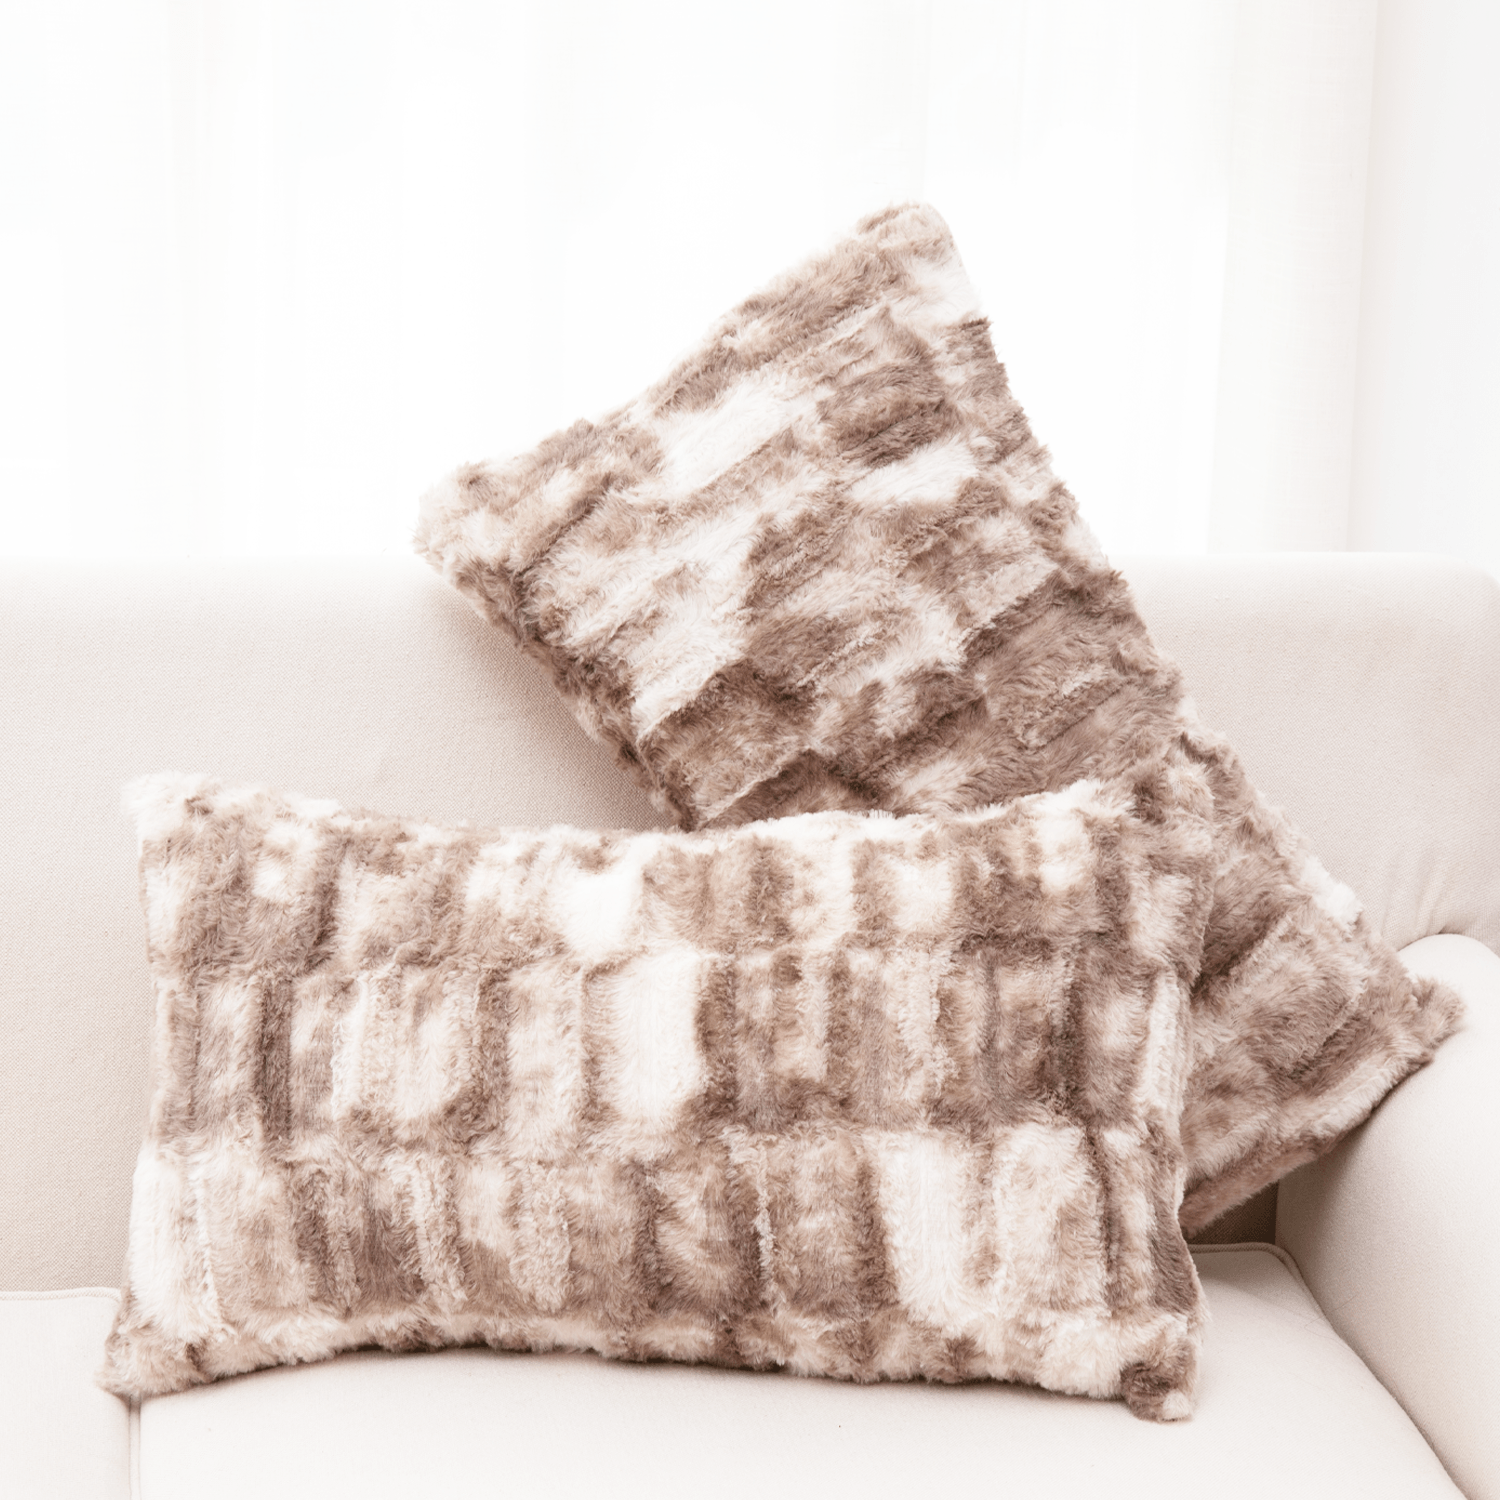 https://cdn.shopify.com/s/files/1/2091/6511/products/cheer-collection-decorative-faux-fur-throw-pillow-with-inserts-luxuriously-soft-bamboo-design-accent-pillows-12-x-20-set-of-2-348336.png?v=1678133545